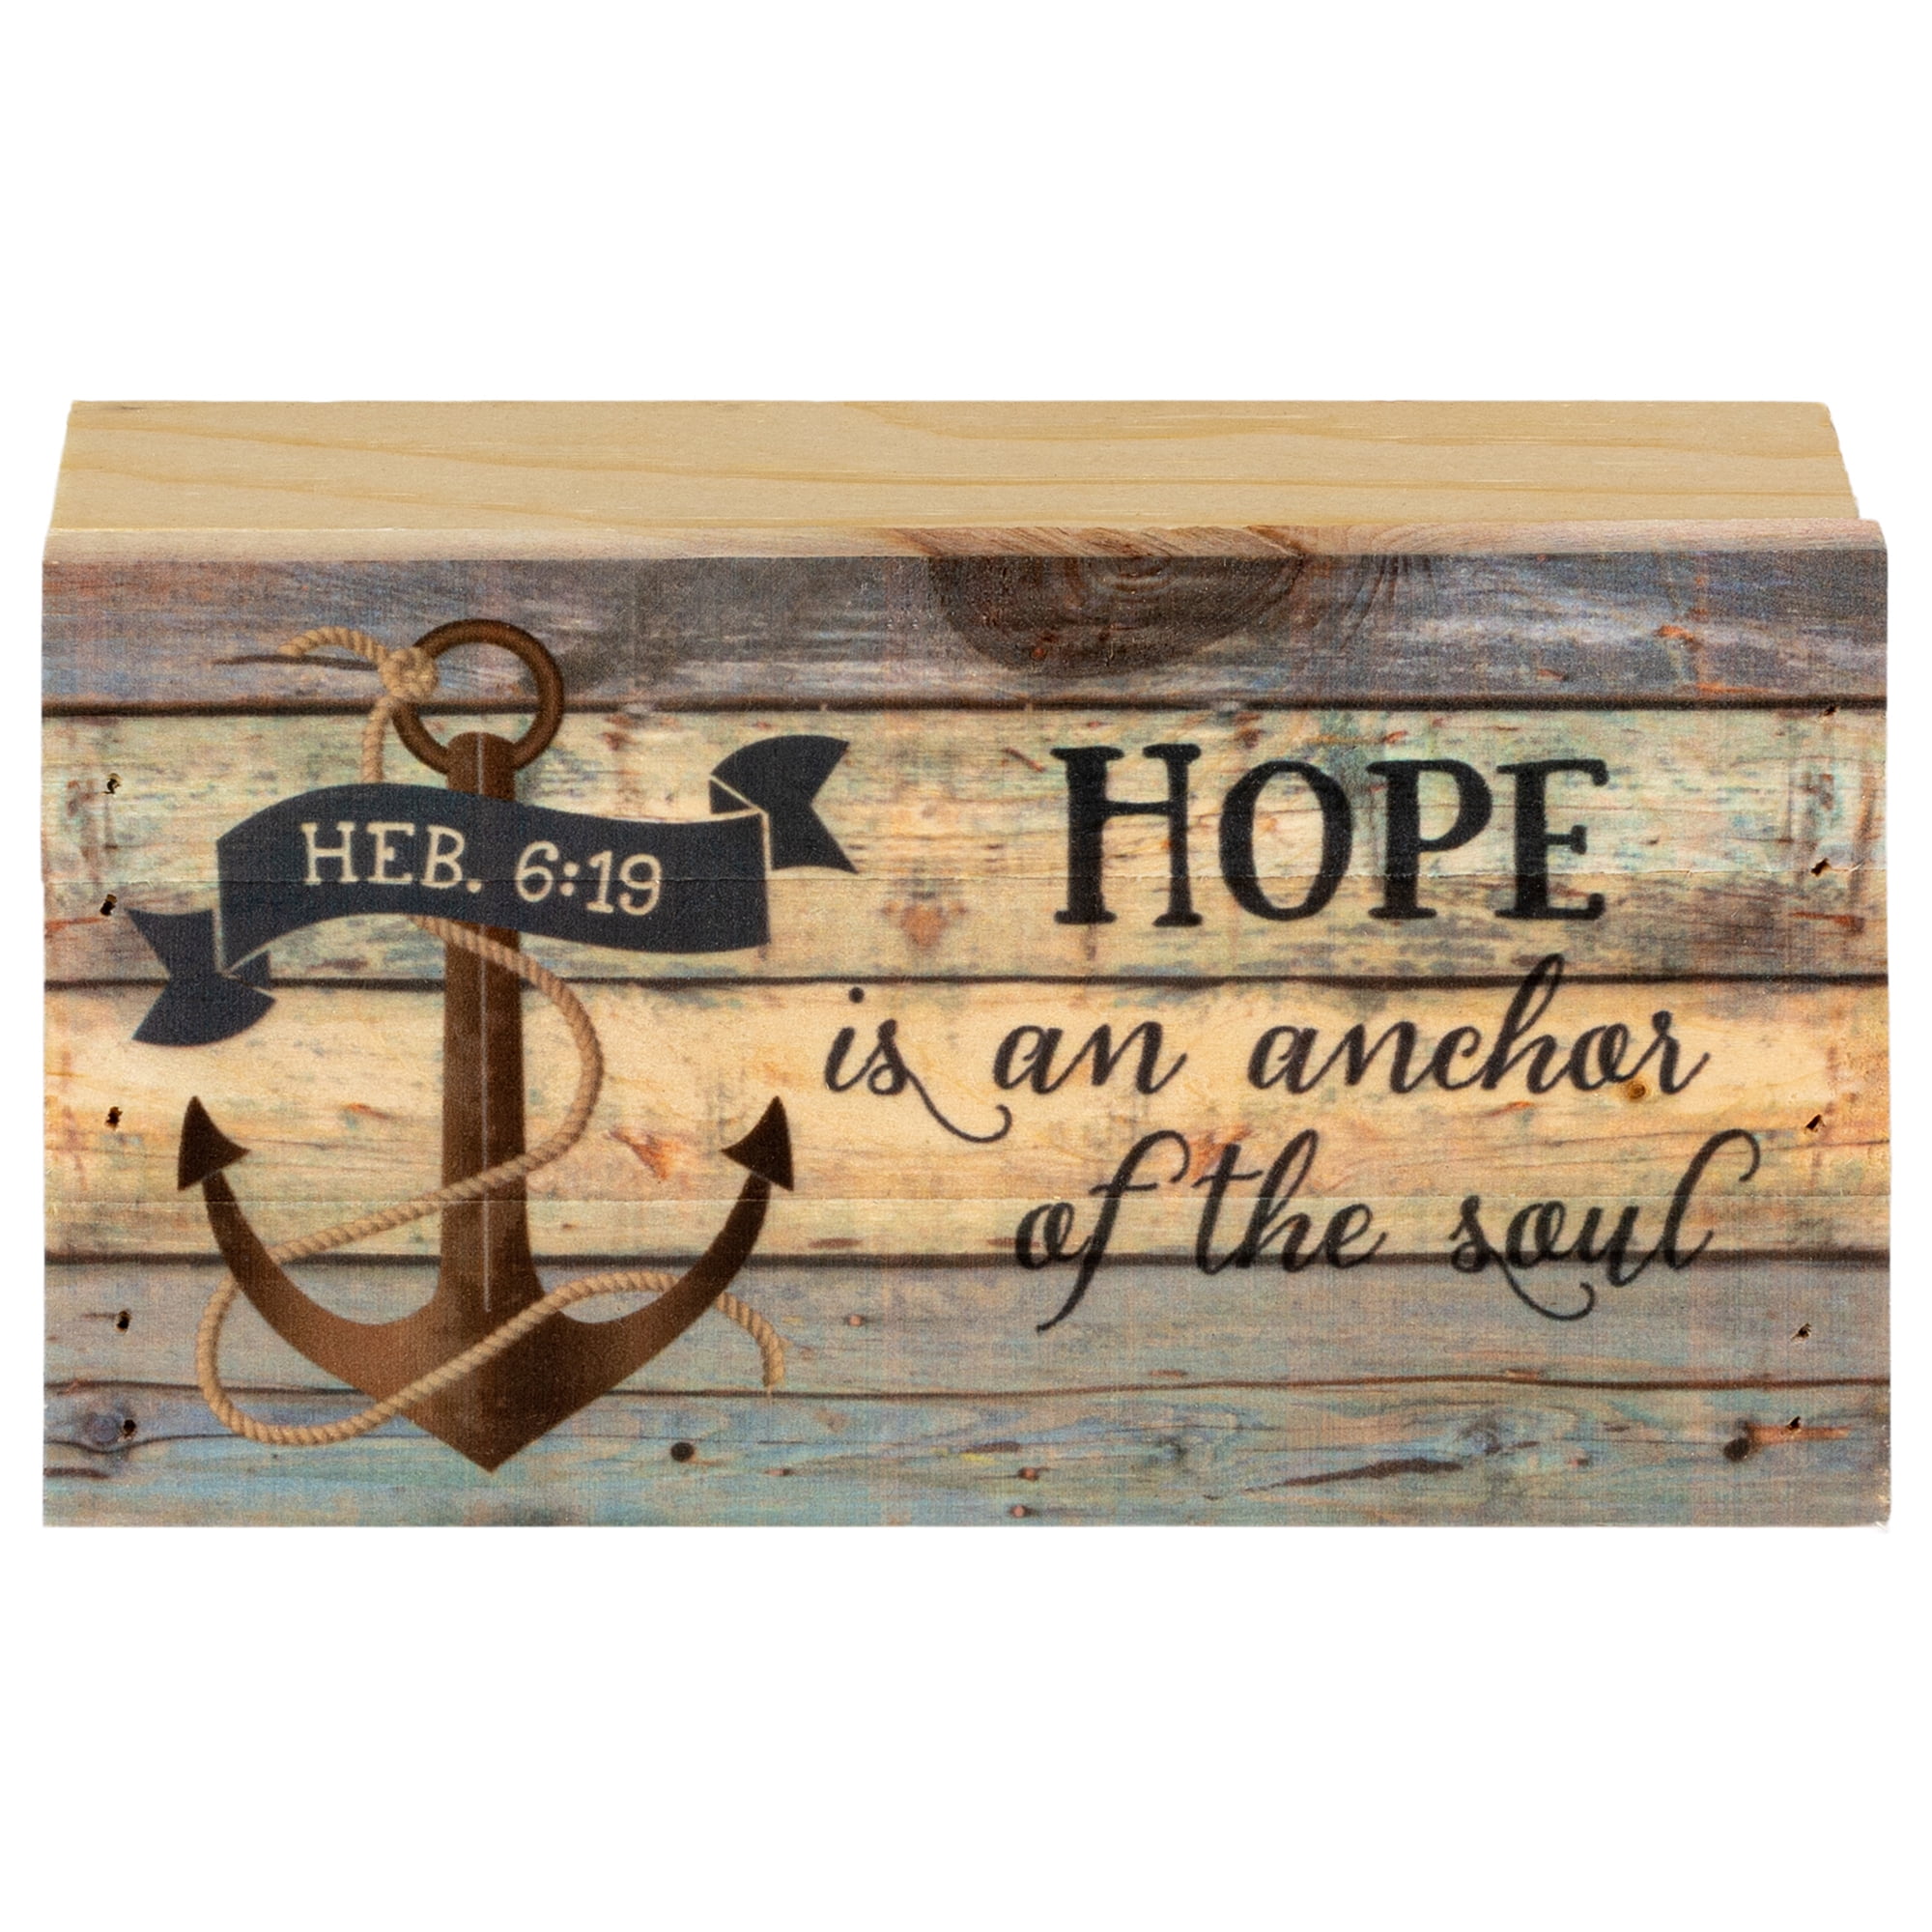 Hope Anchors The Soul Religious Art Poster 12x18 inch 